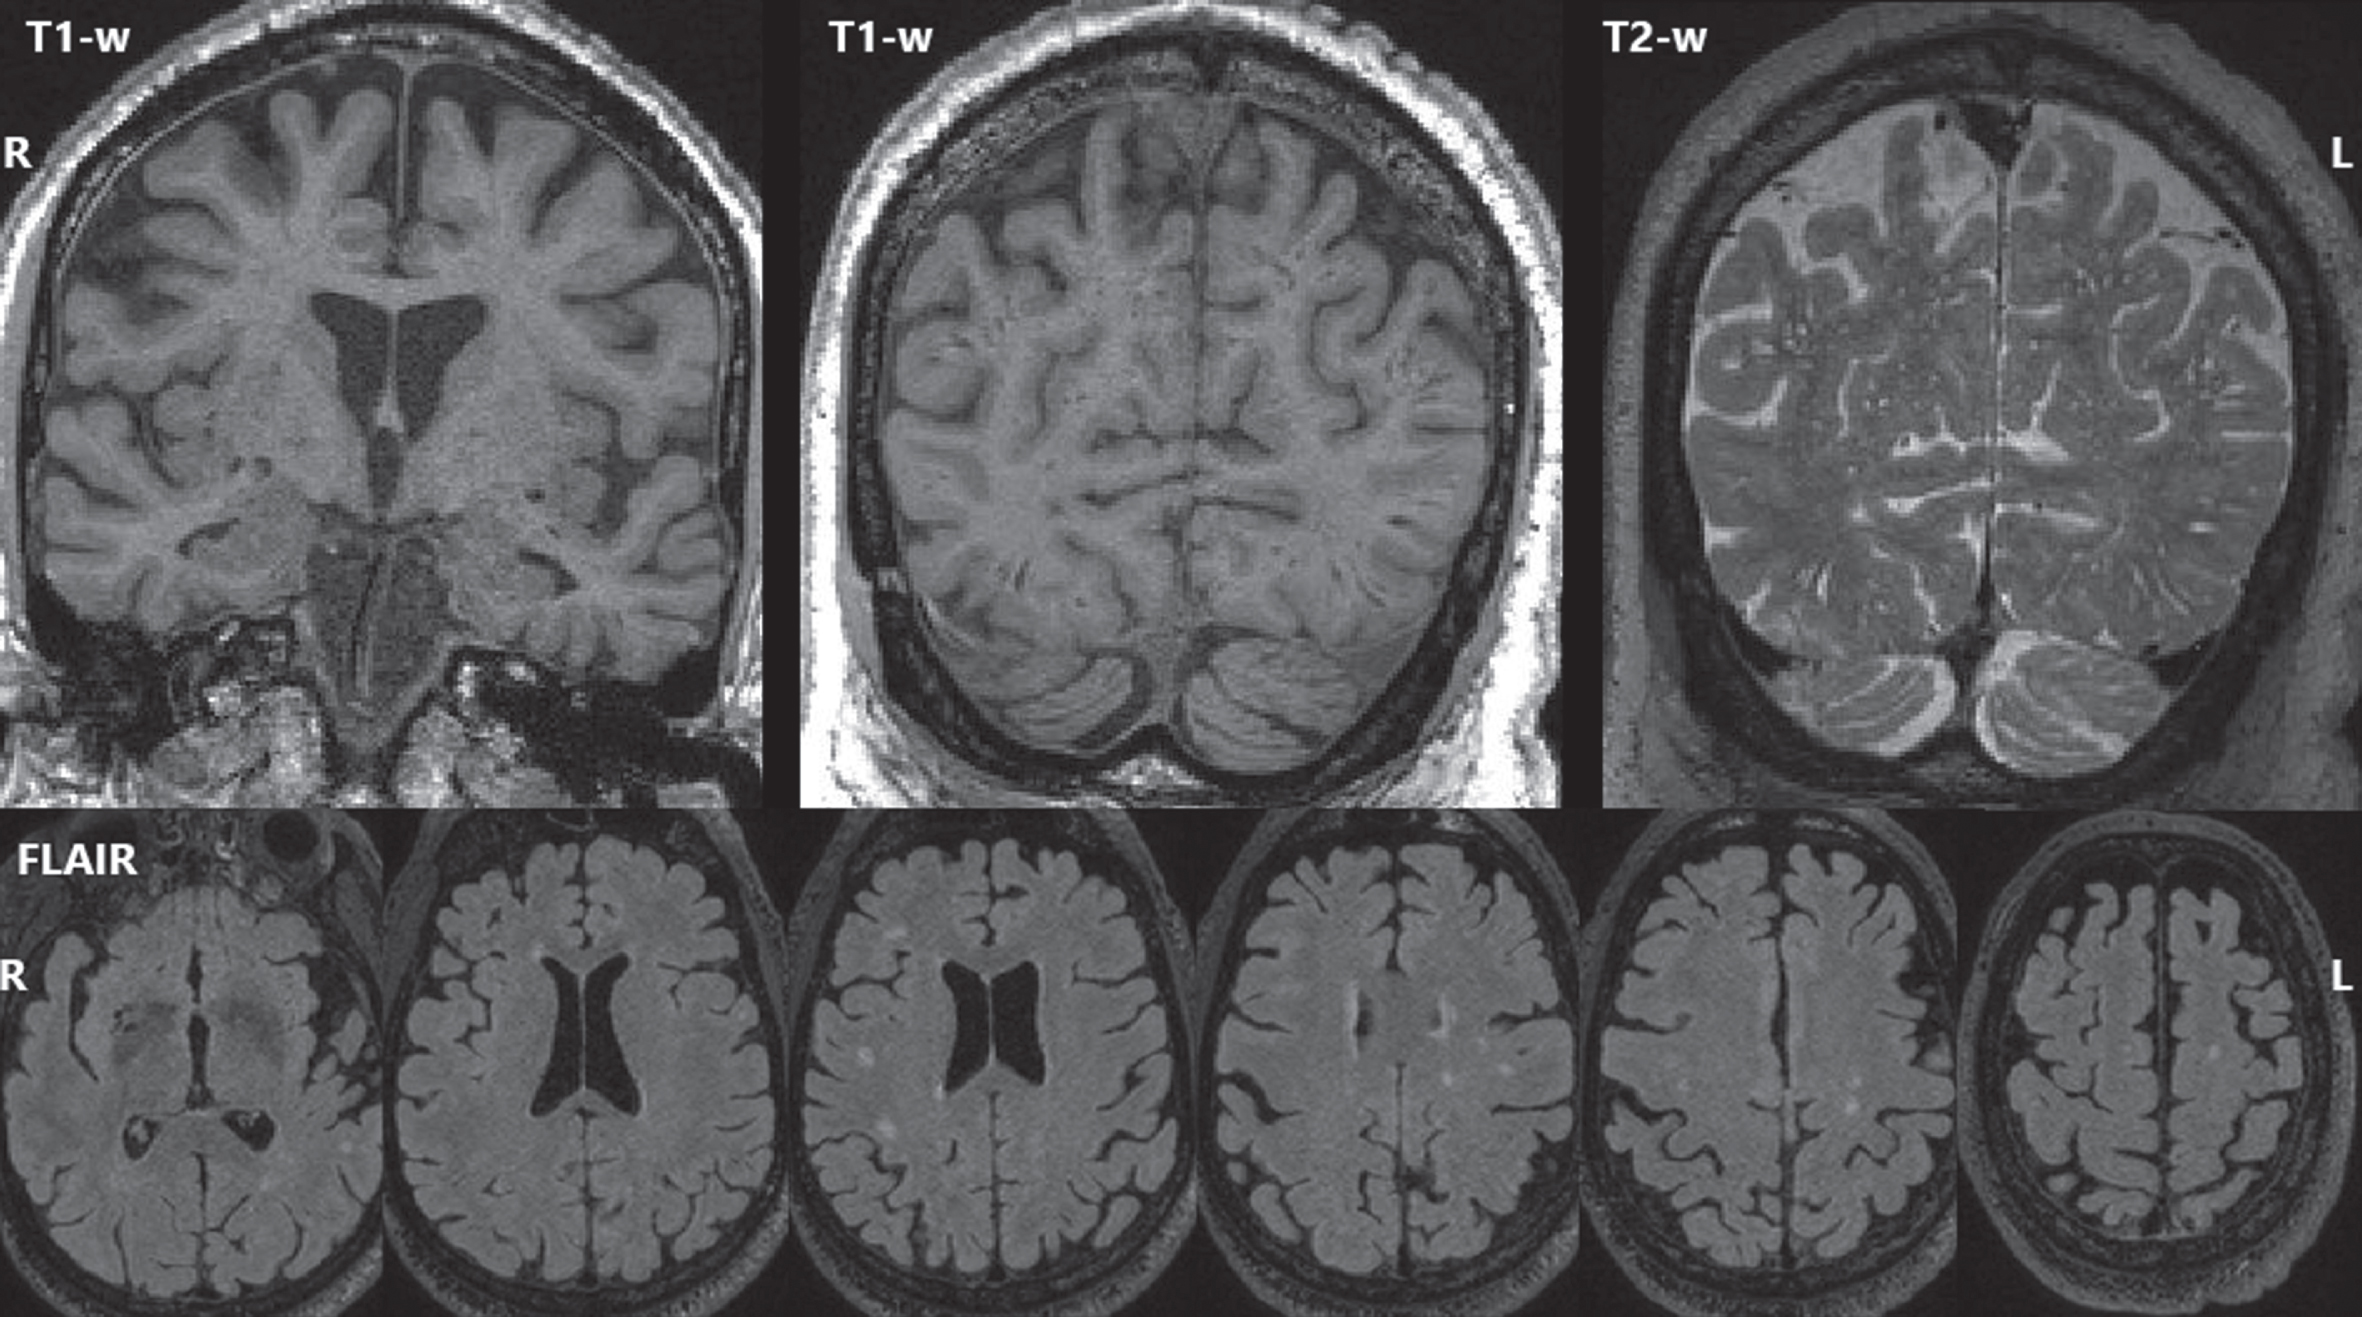 MRI findings. The most recent (age 77) T1-weighted MRI (top left, top center), and T2-weighted MRI (top right) showed mild global volume loss and extensive dilated perivascular spaces throughout the cerebrum. FLAIR MRI (bottom row) showed white matter hyperintensities (biomarkers of small vessel ischemic change) with an age-typical total volume but an atypical distribution with focal lesions scattered throughout deeper white matter rather than a more typical periventricular pattern.